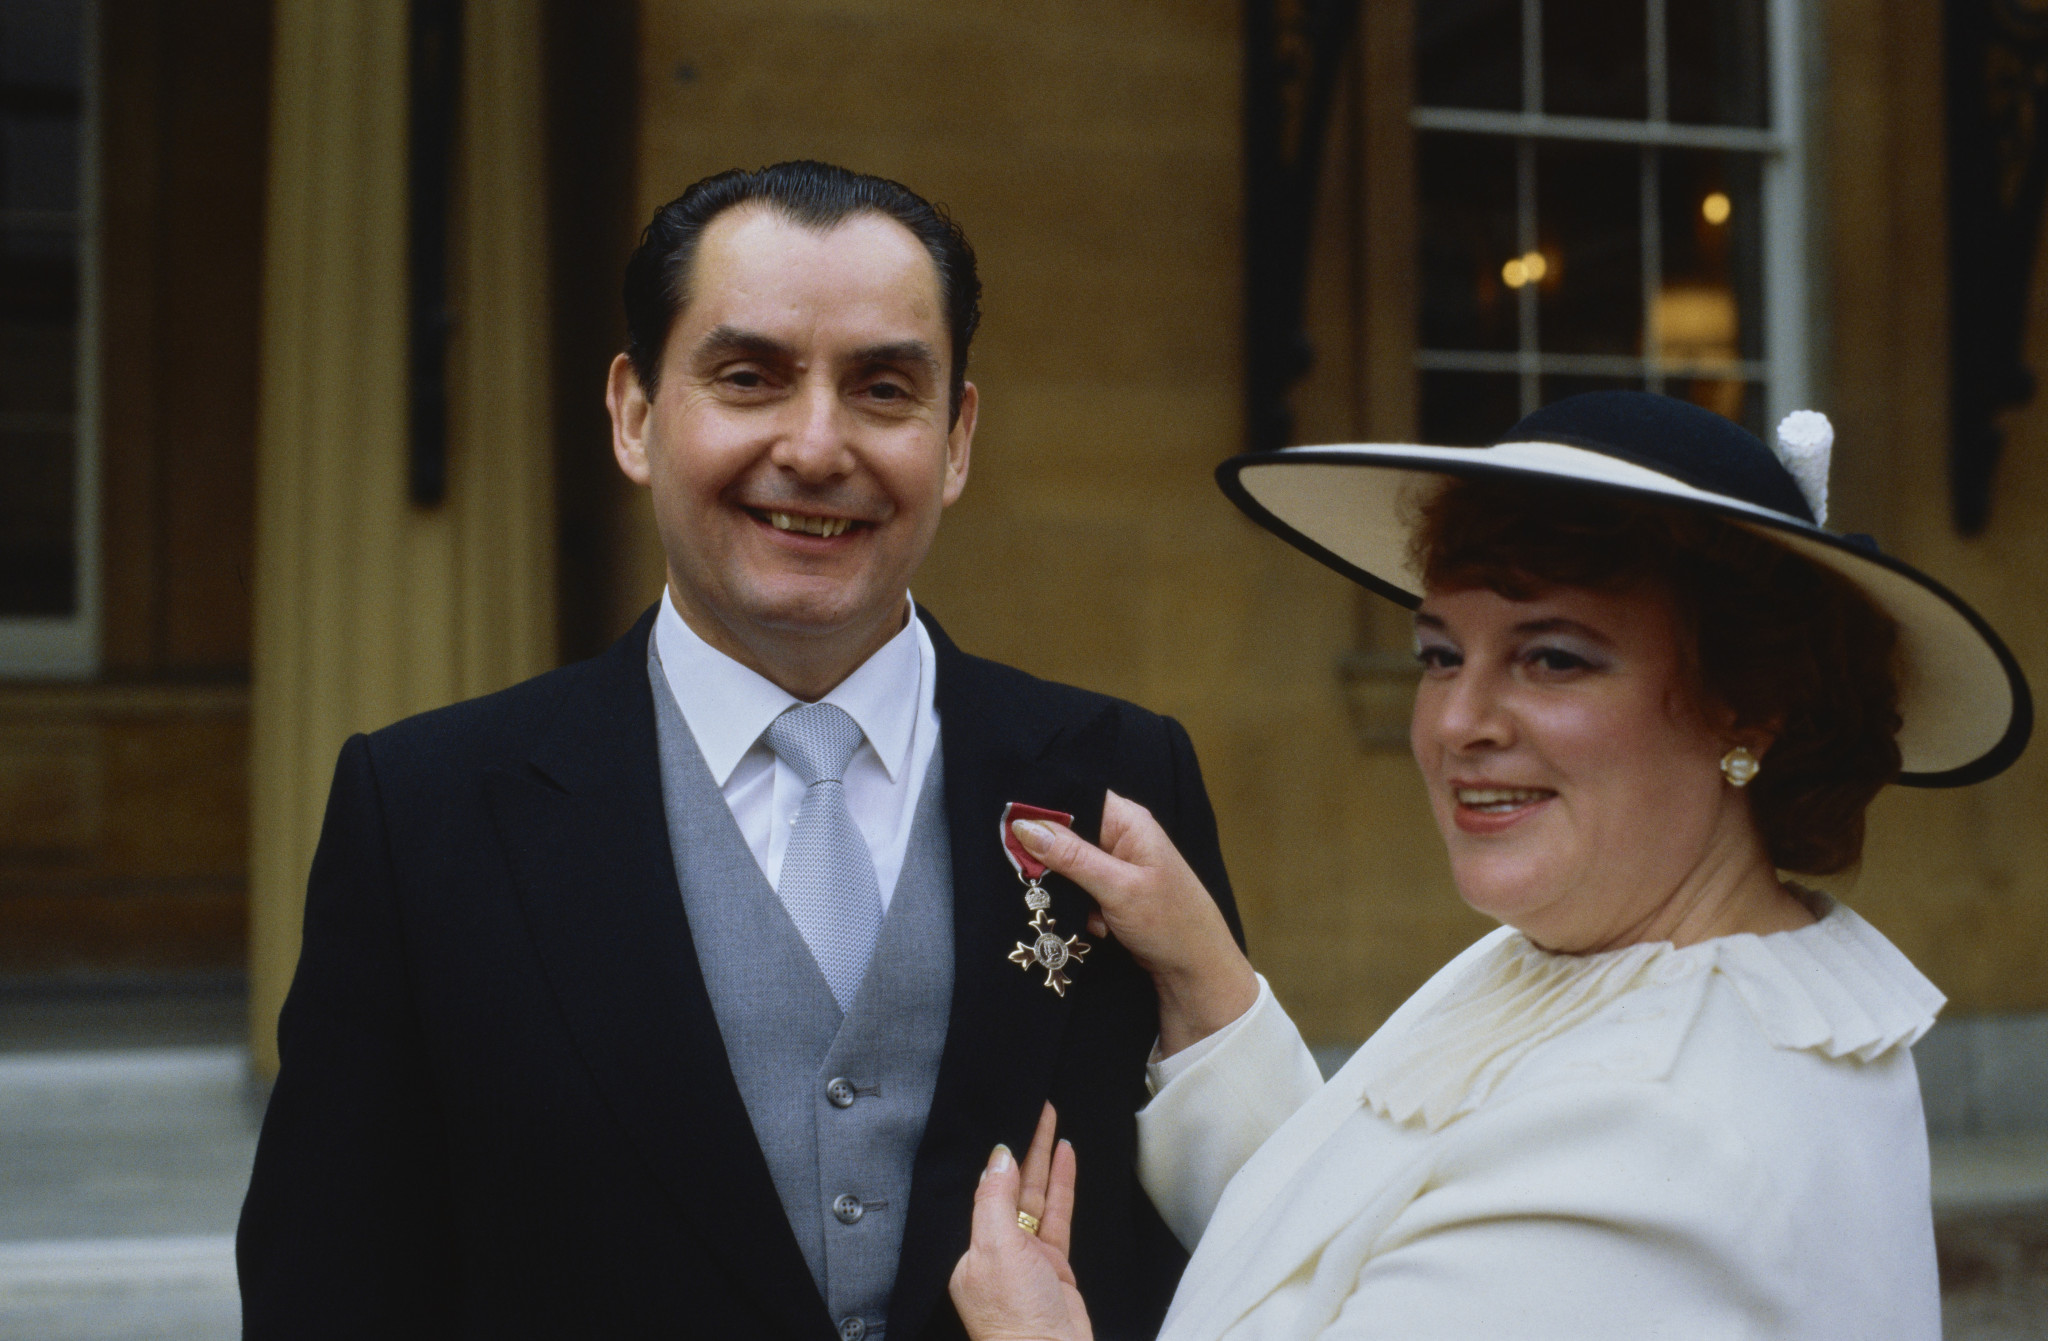 Snooker legend Ray Reardon has died aged 91. GETTY IMAGES